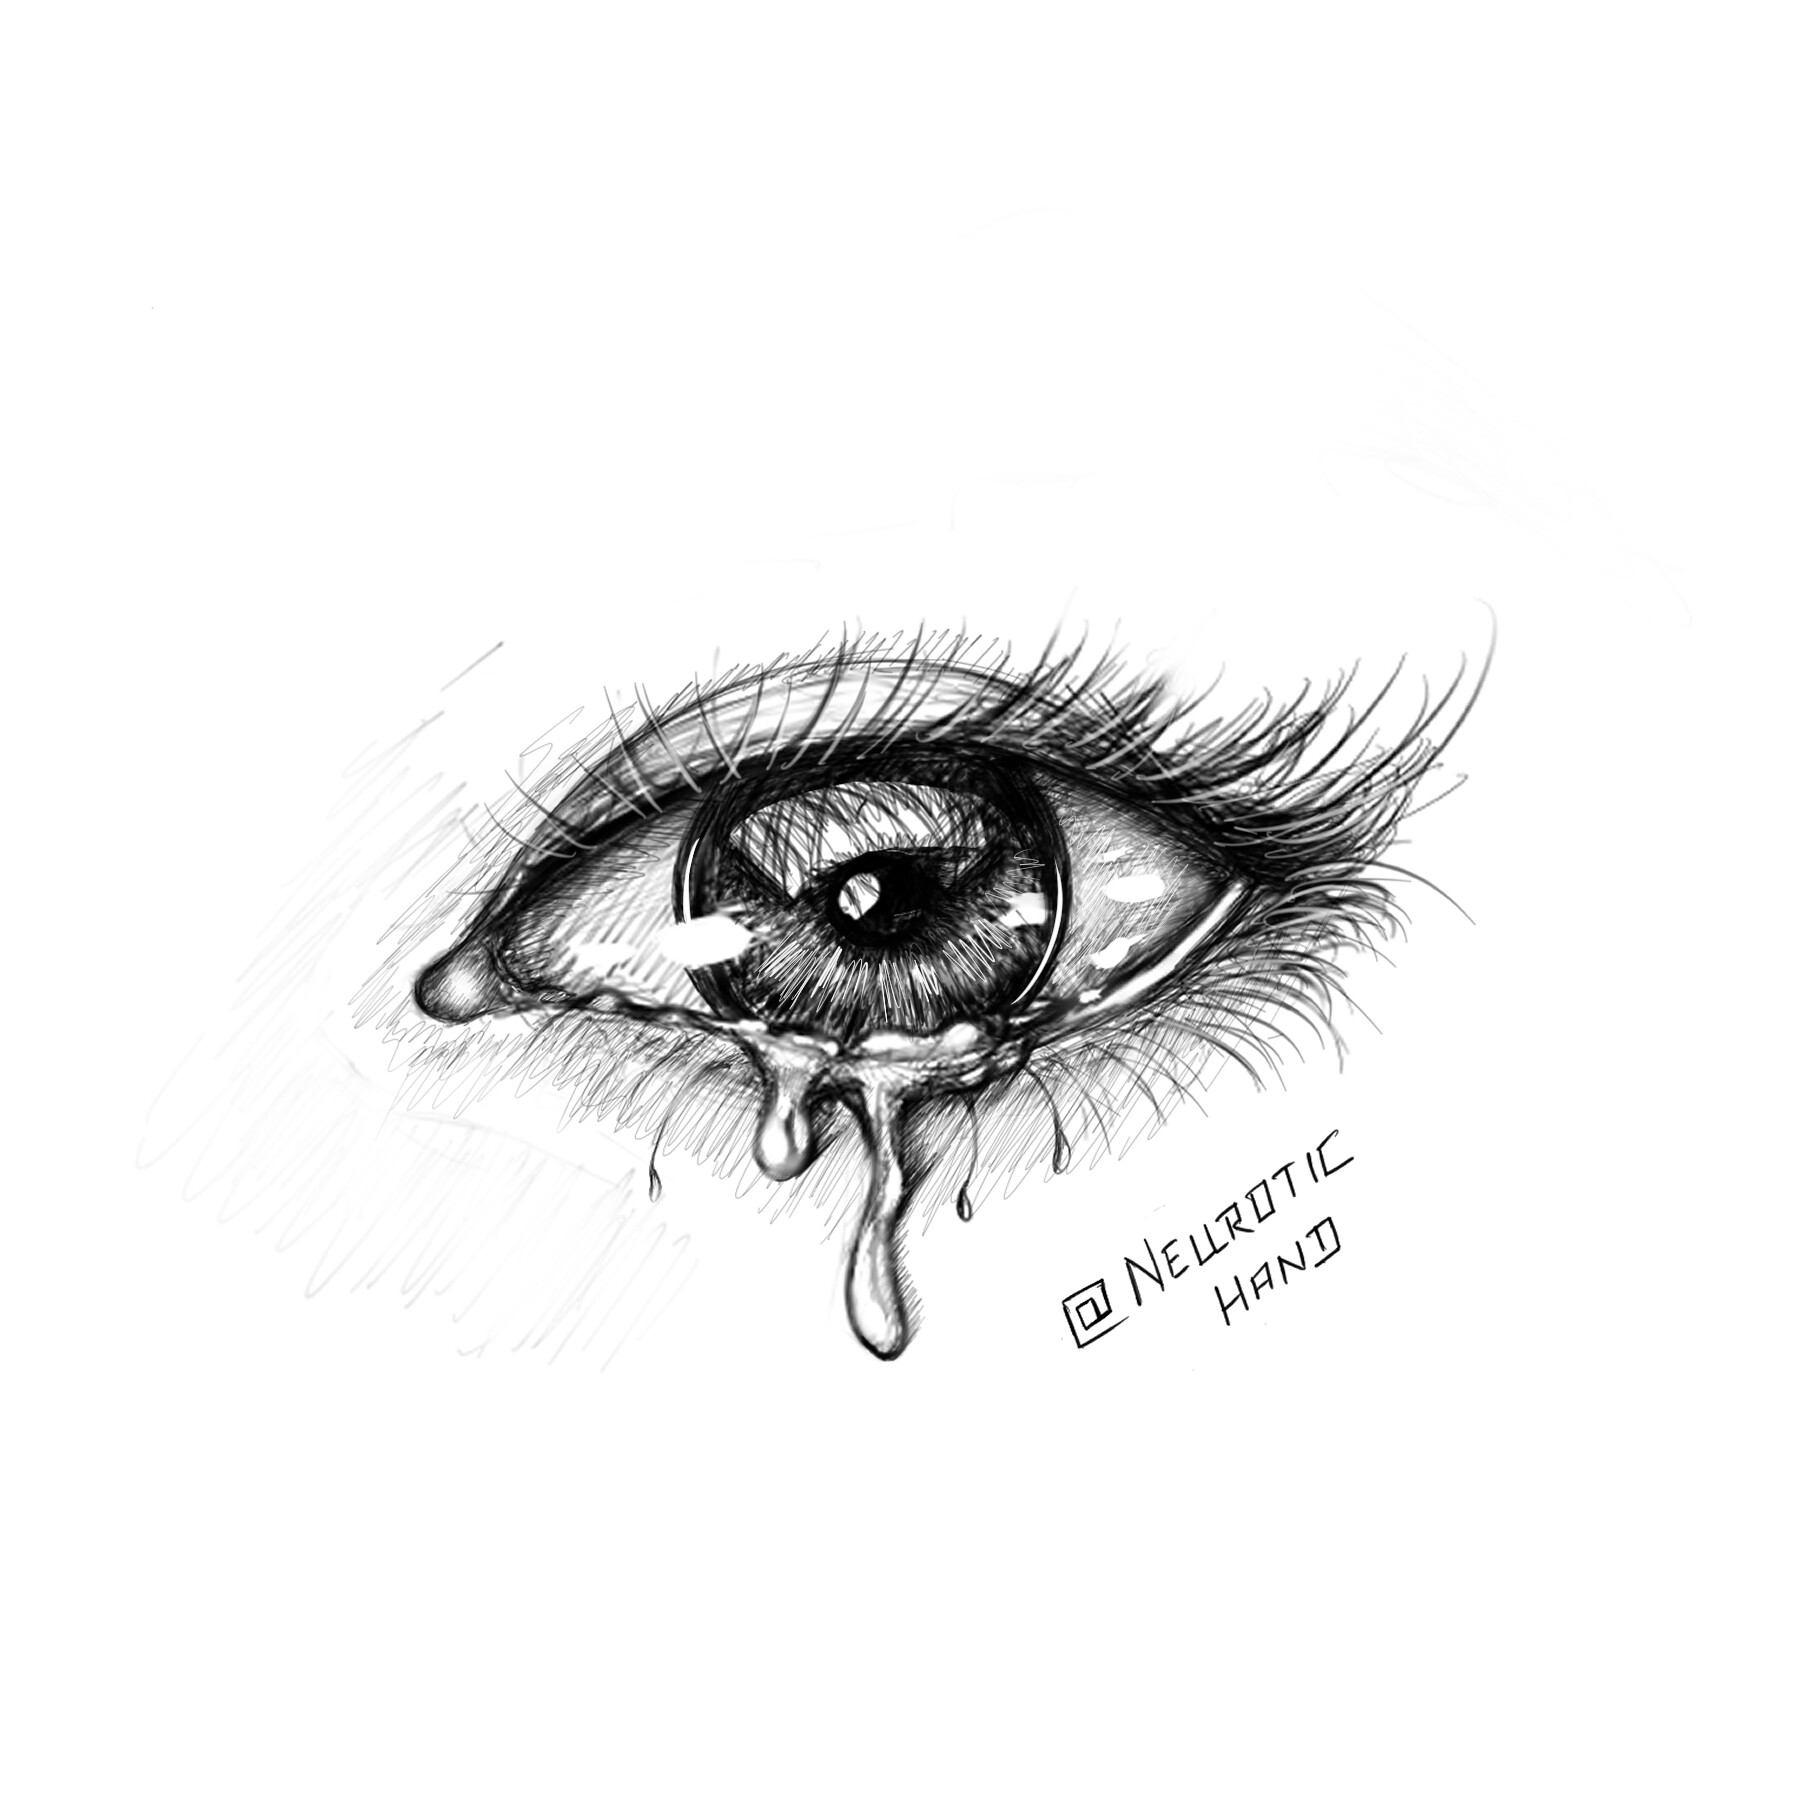 How To Draw A Crying Eyes For Beginners How To Draw An Eyes With Tear Step By Step Pencil Sketch